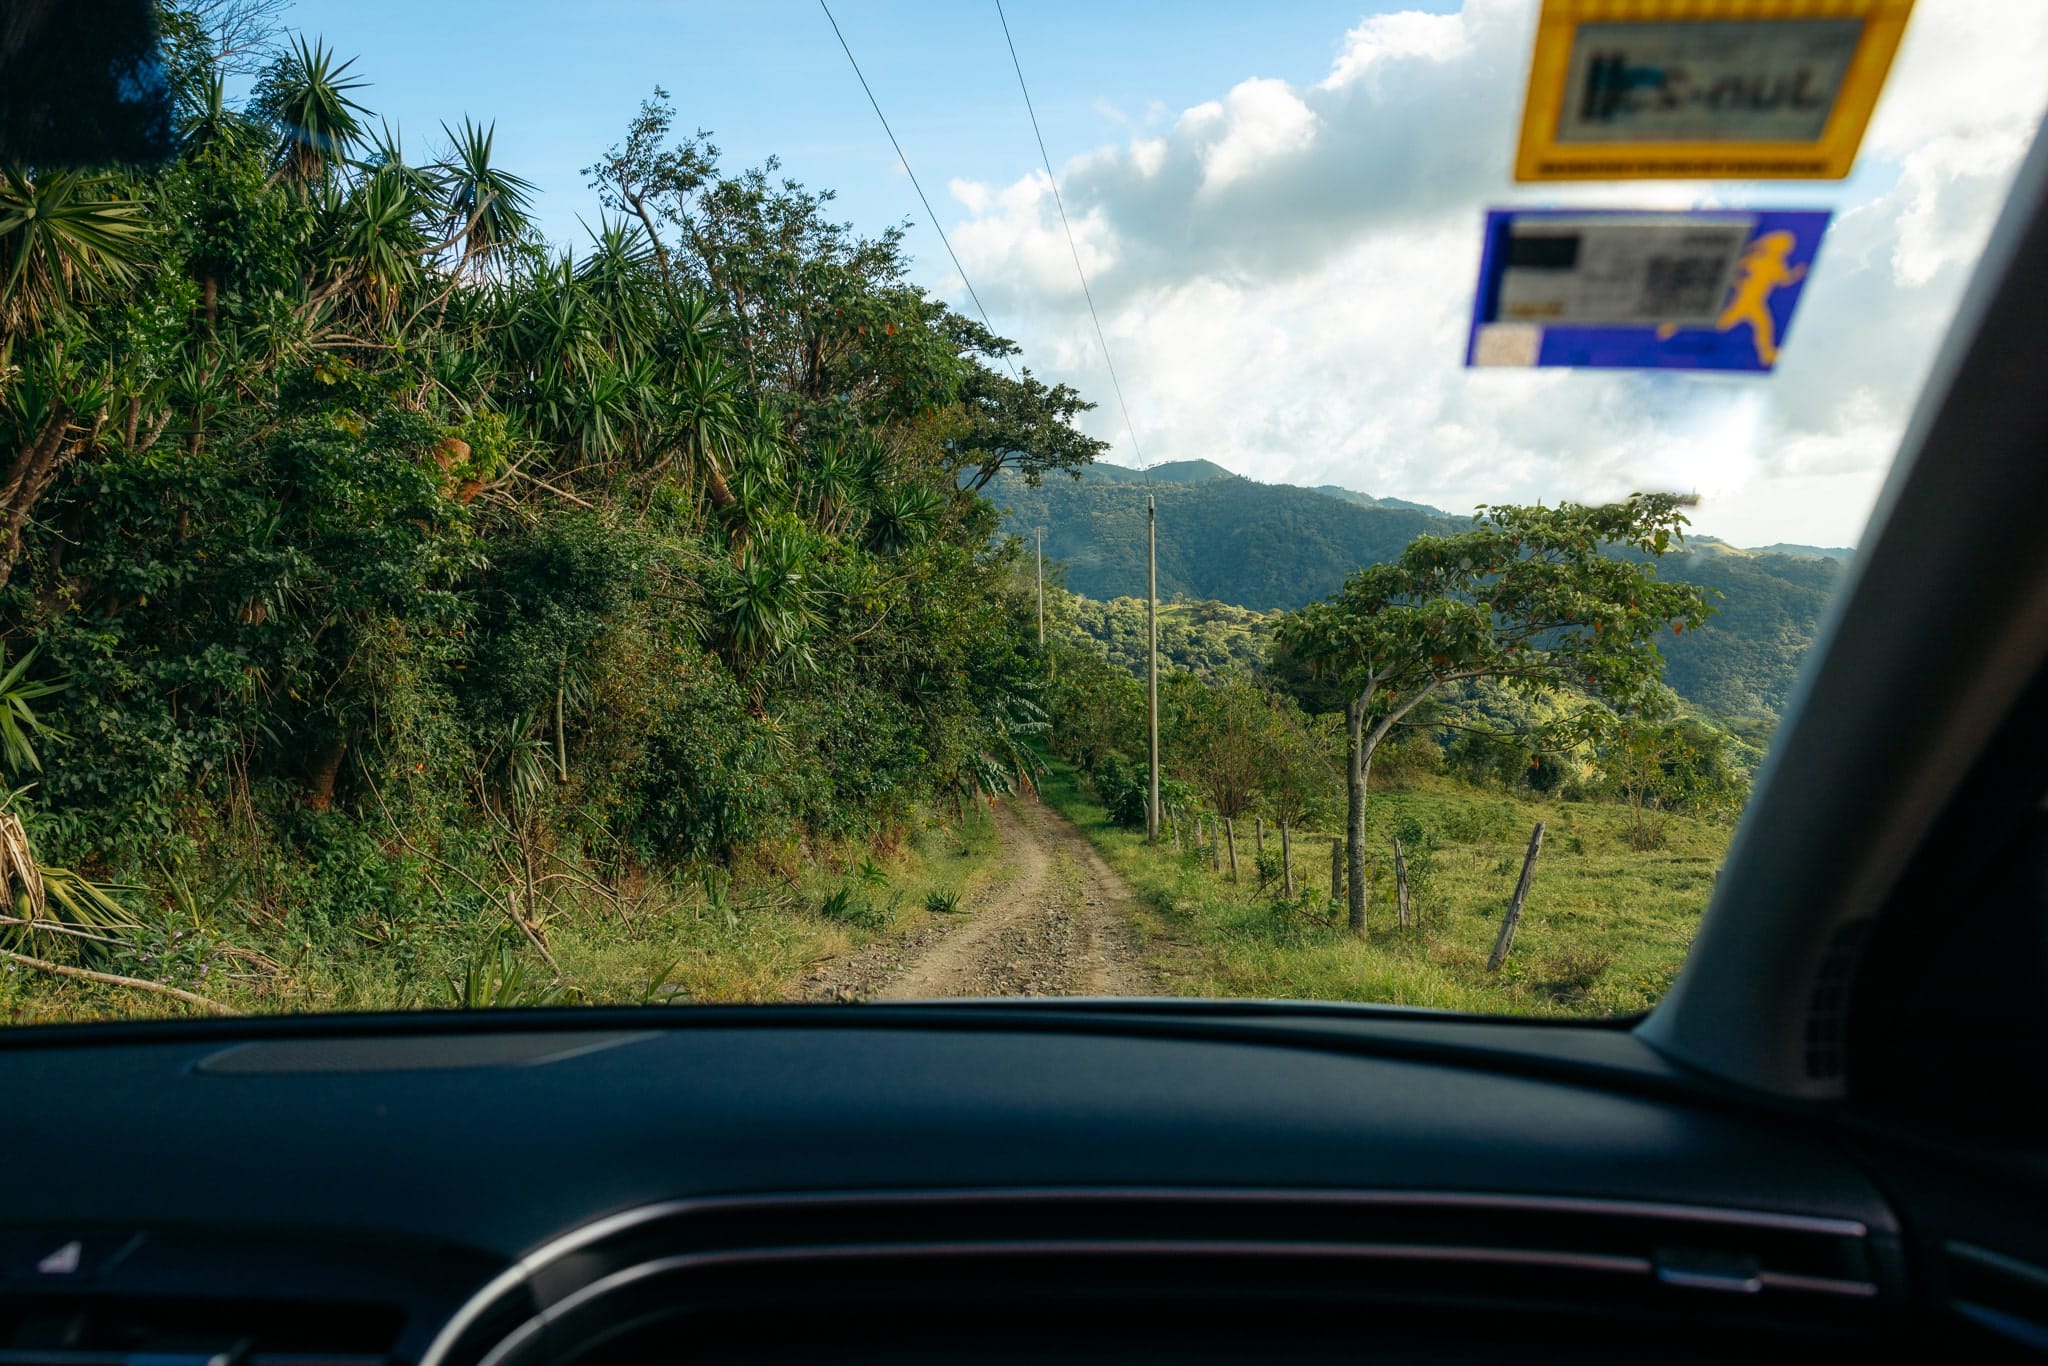 Looking out the windshield while driving on the back roads in Monteverde, Costa Rica